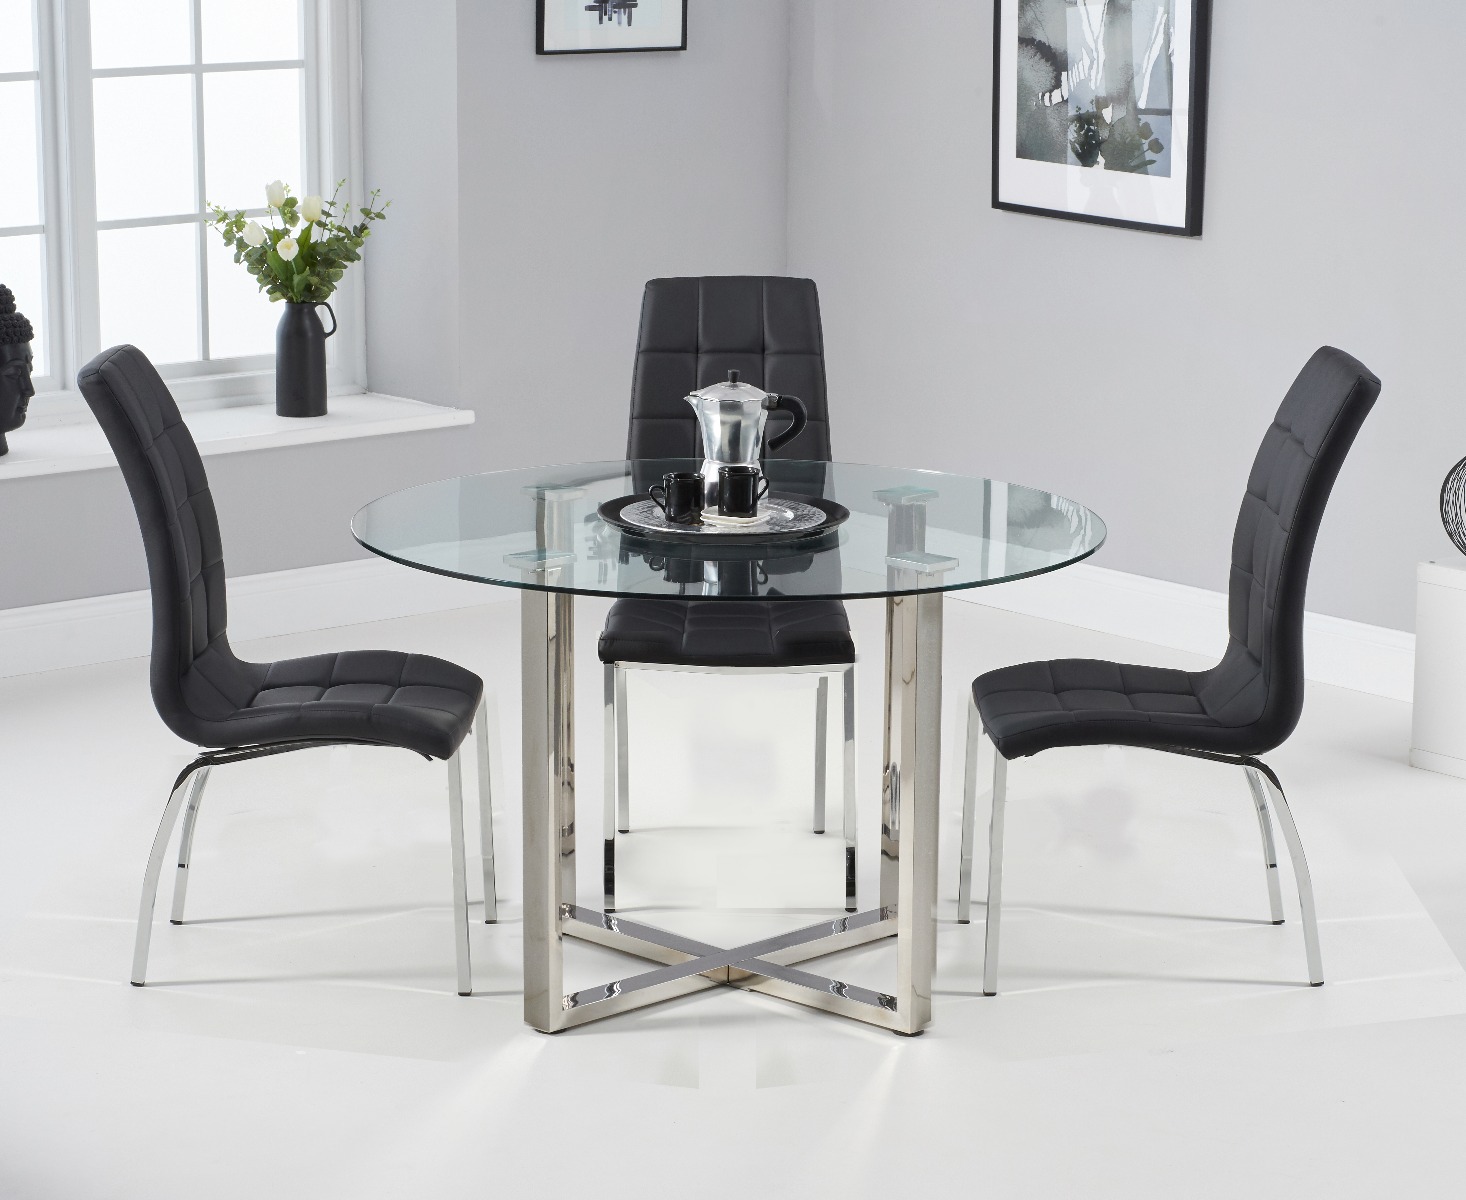 Vaso 120cm Round Glass Dining Table With 4 Black Enzo Chairs